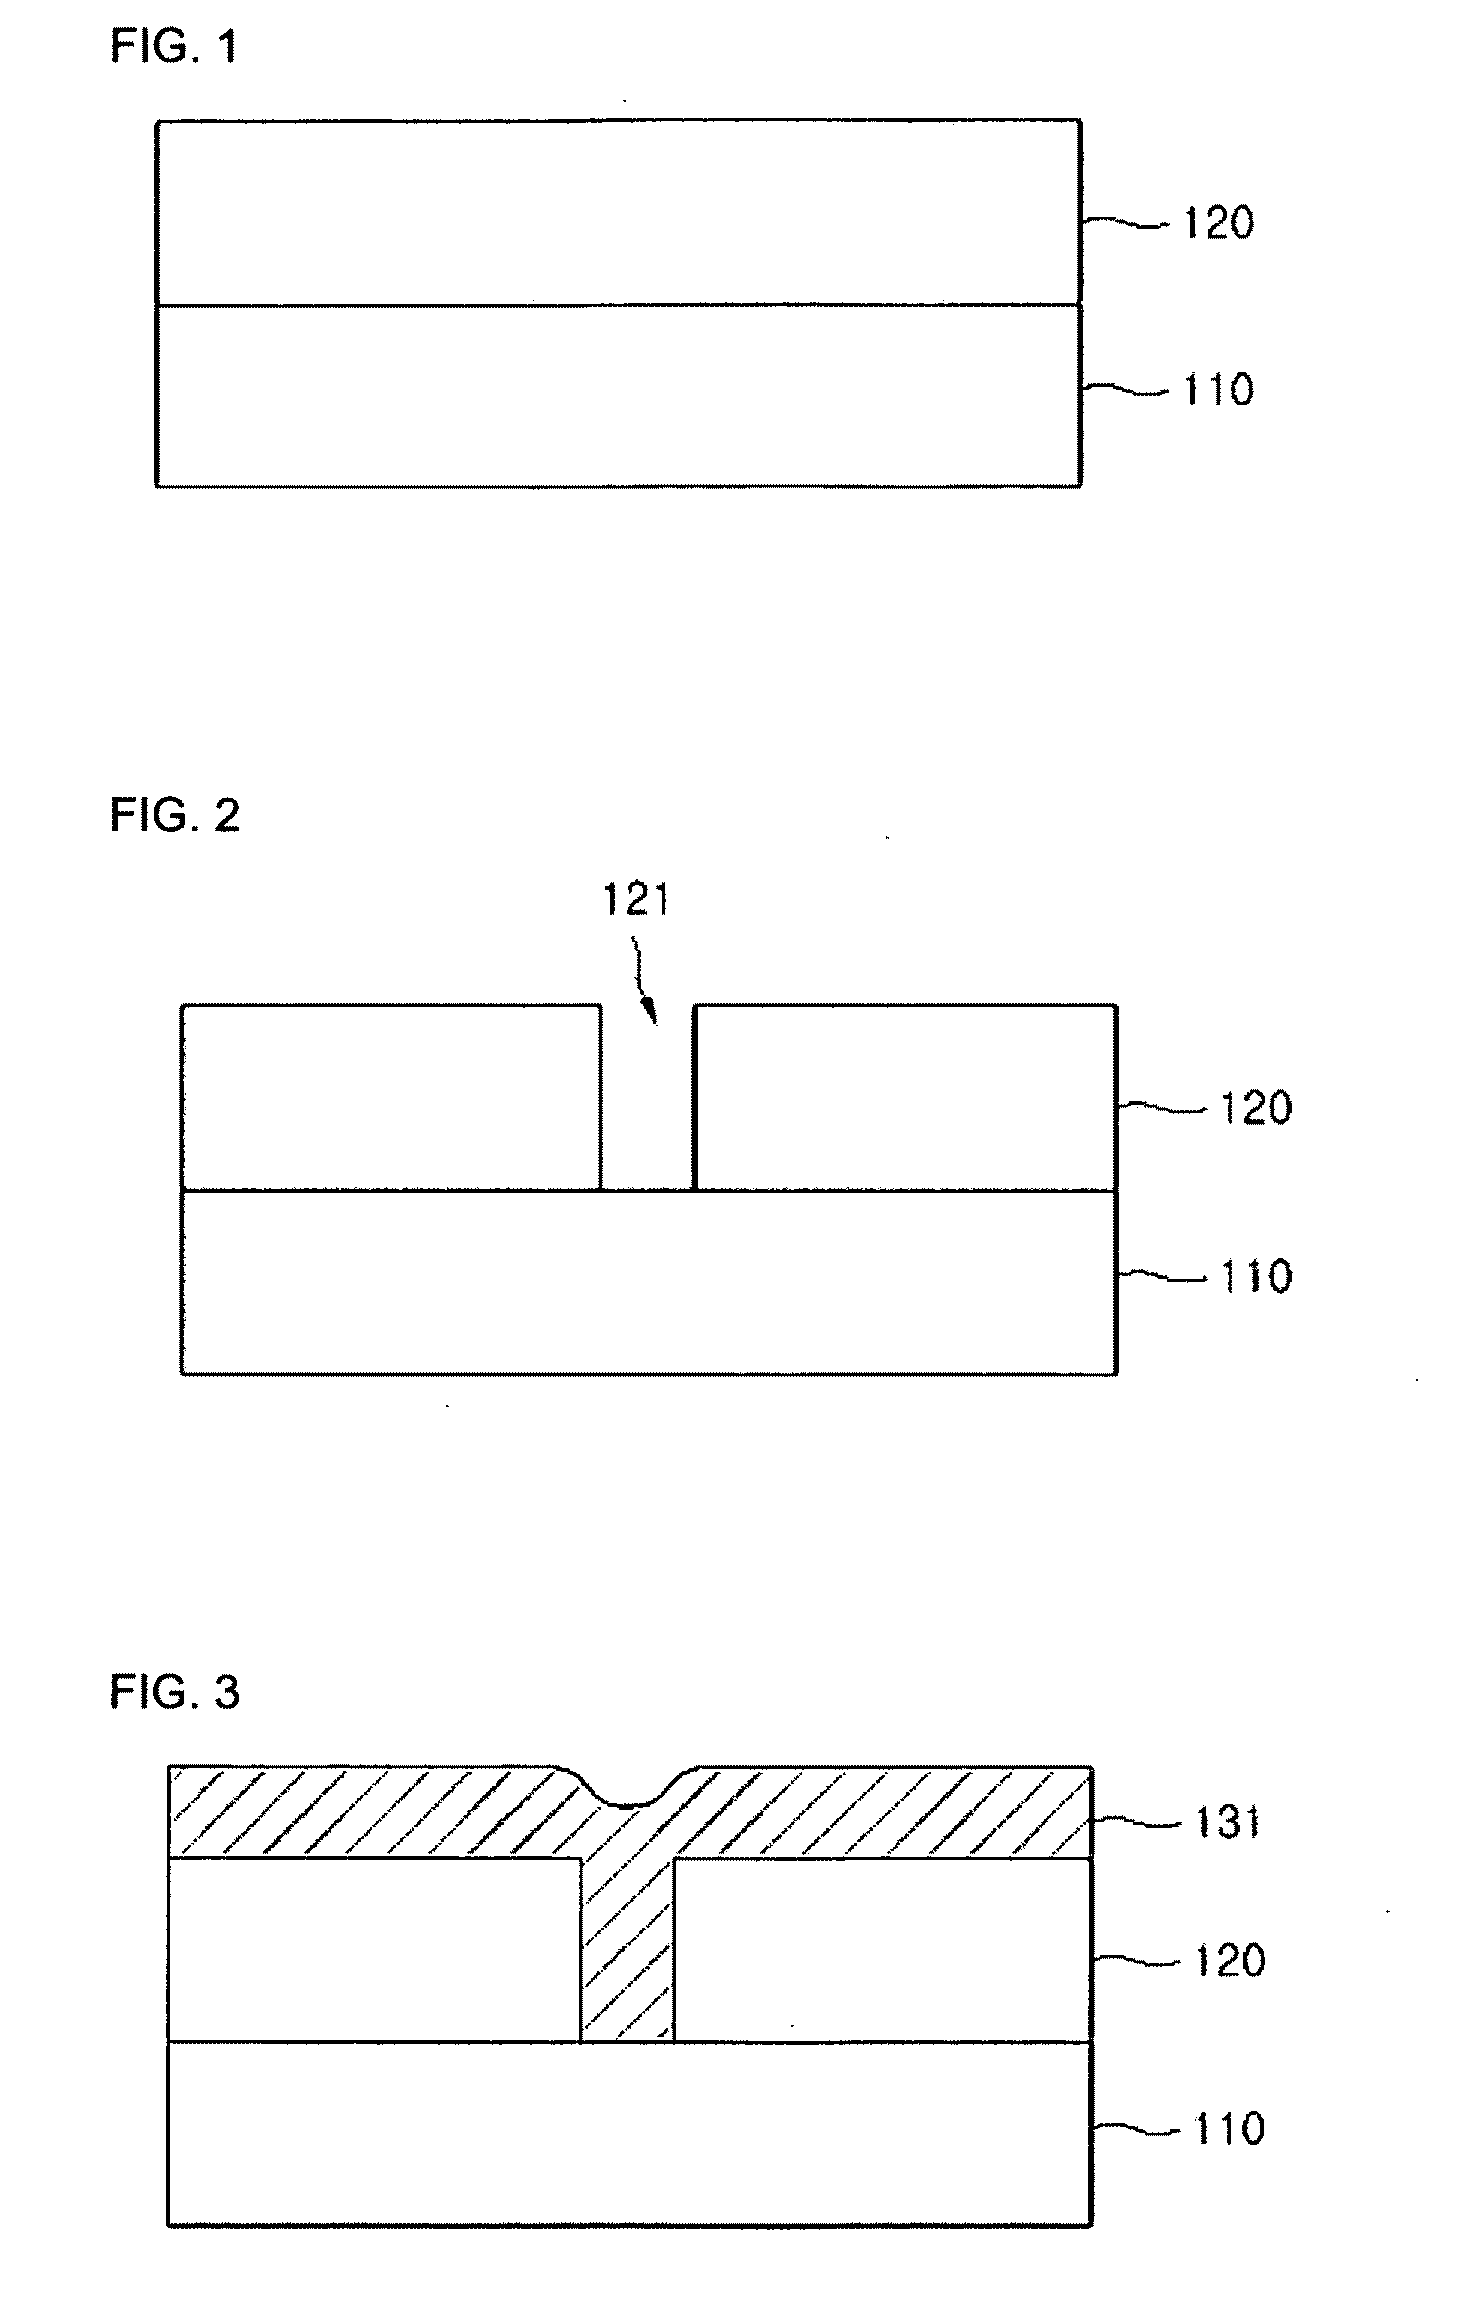 Slurry for polishing phase change material and method for patterning polishing phase change material using the same